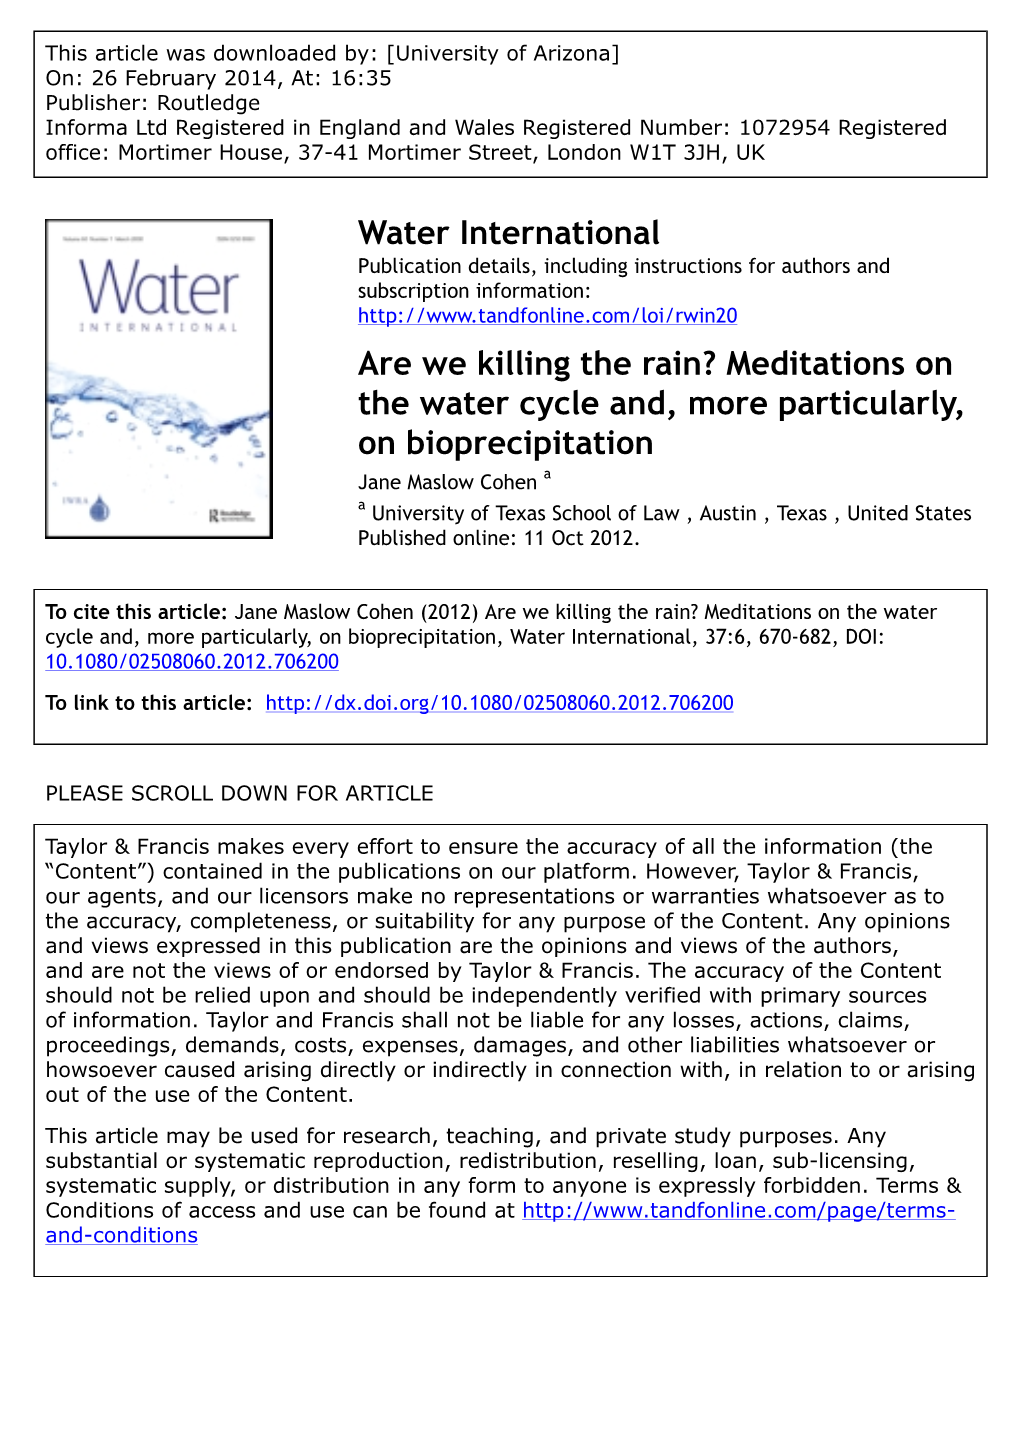 Water International Are We Killing the Rain? Meditations on the Water Cycle